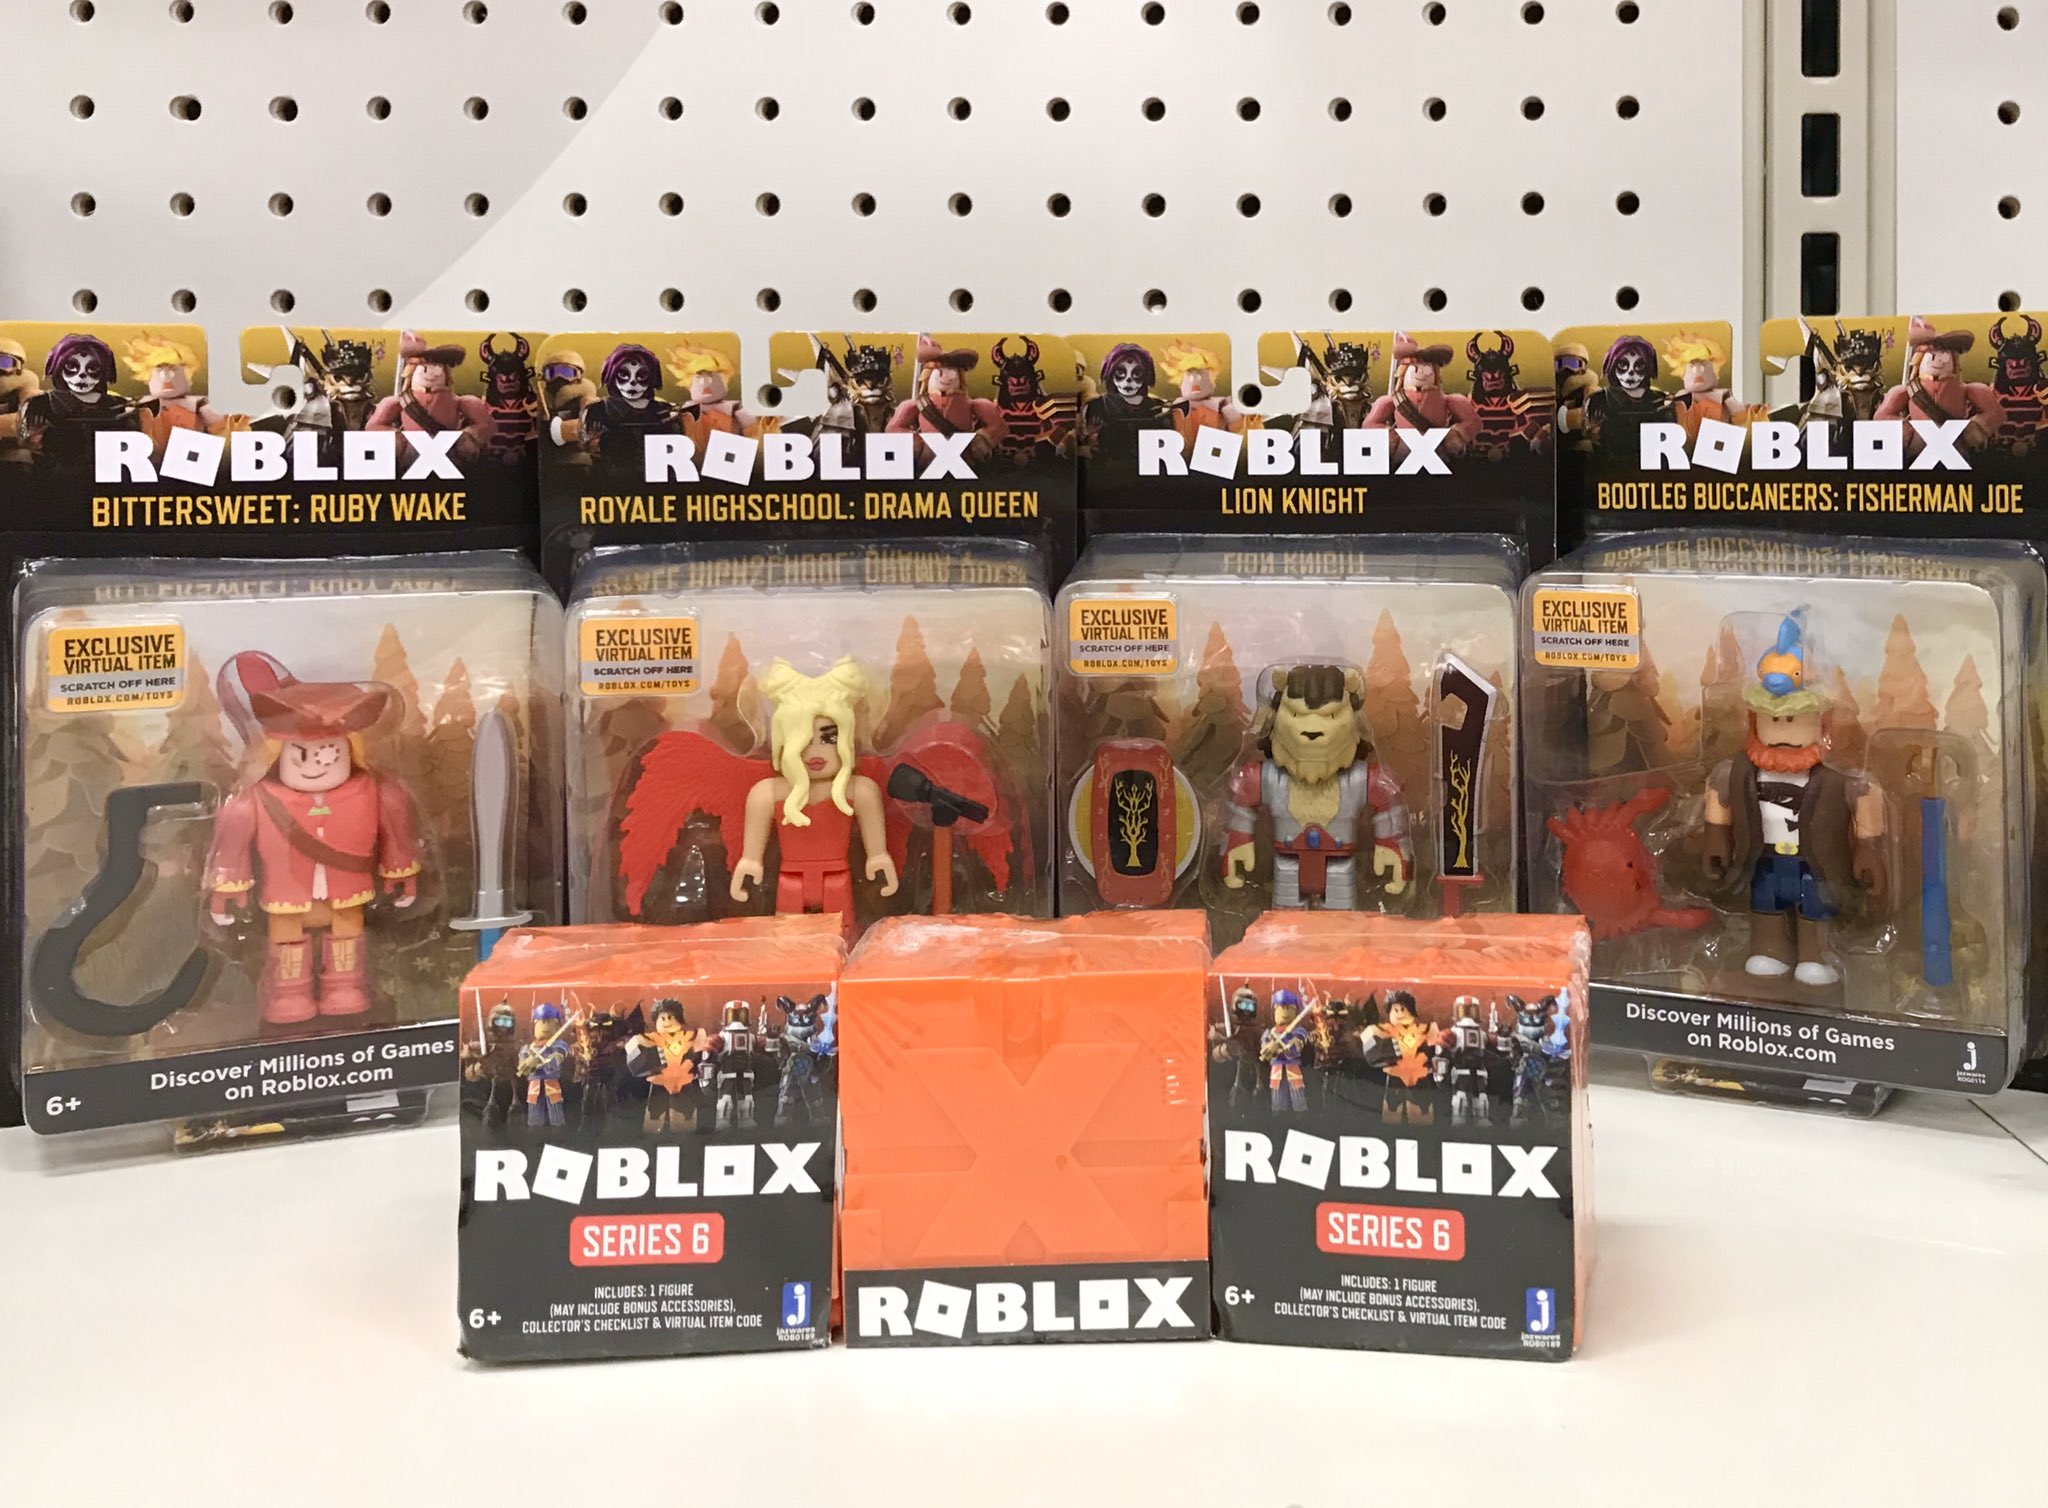 lily on twitter target is making room for some new roblox toys and discontinuing old ones series 5 and celeb purple are not discontinued they said the celeb blue boxes r also